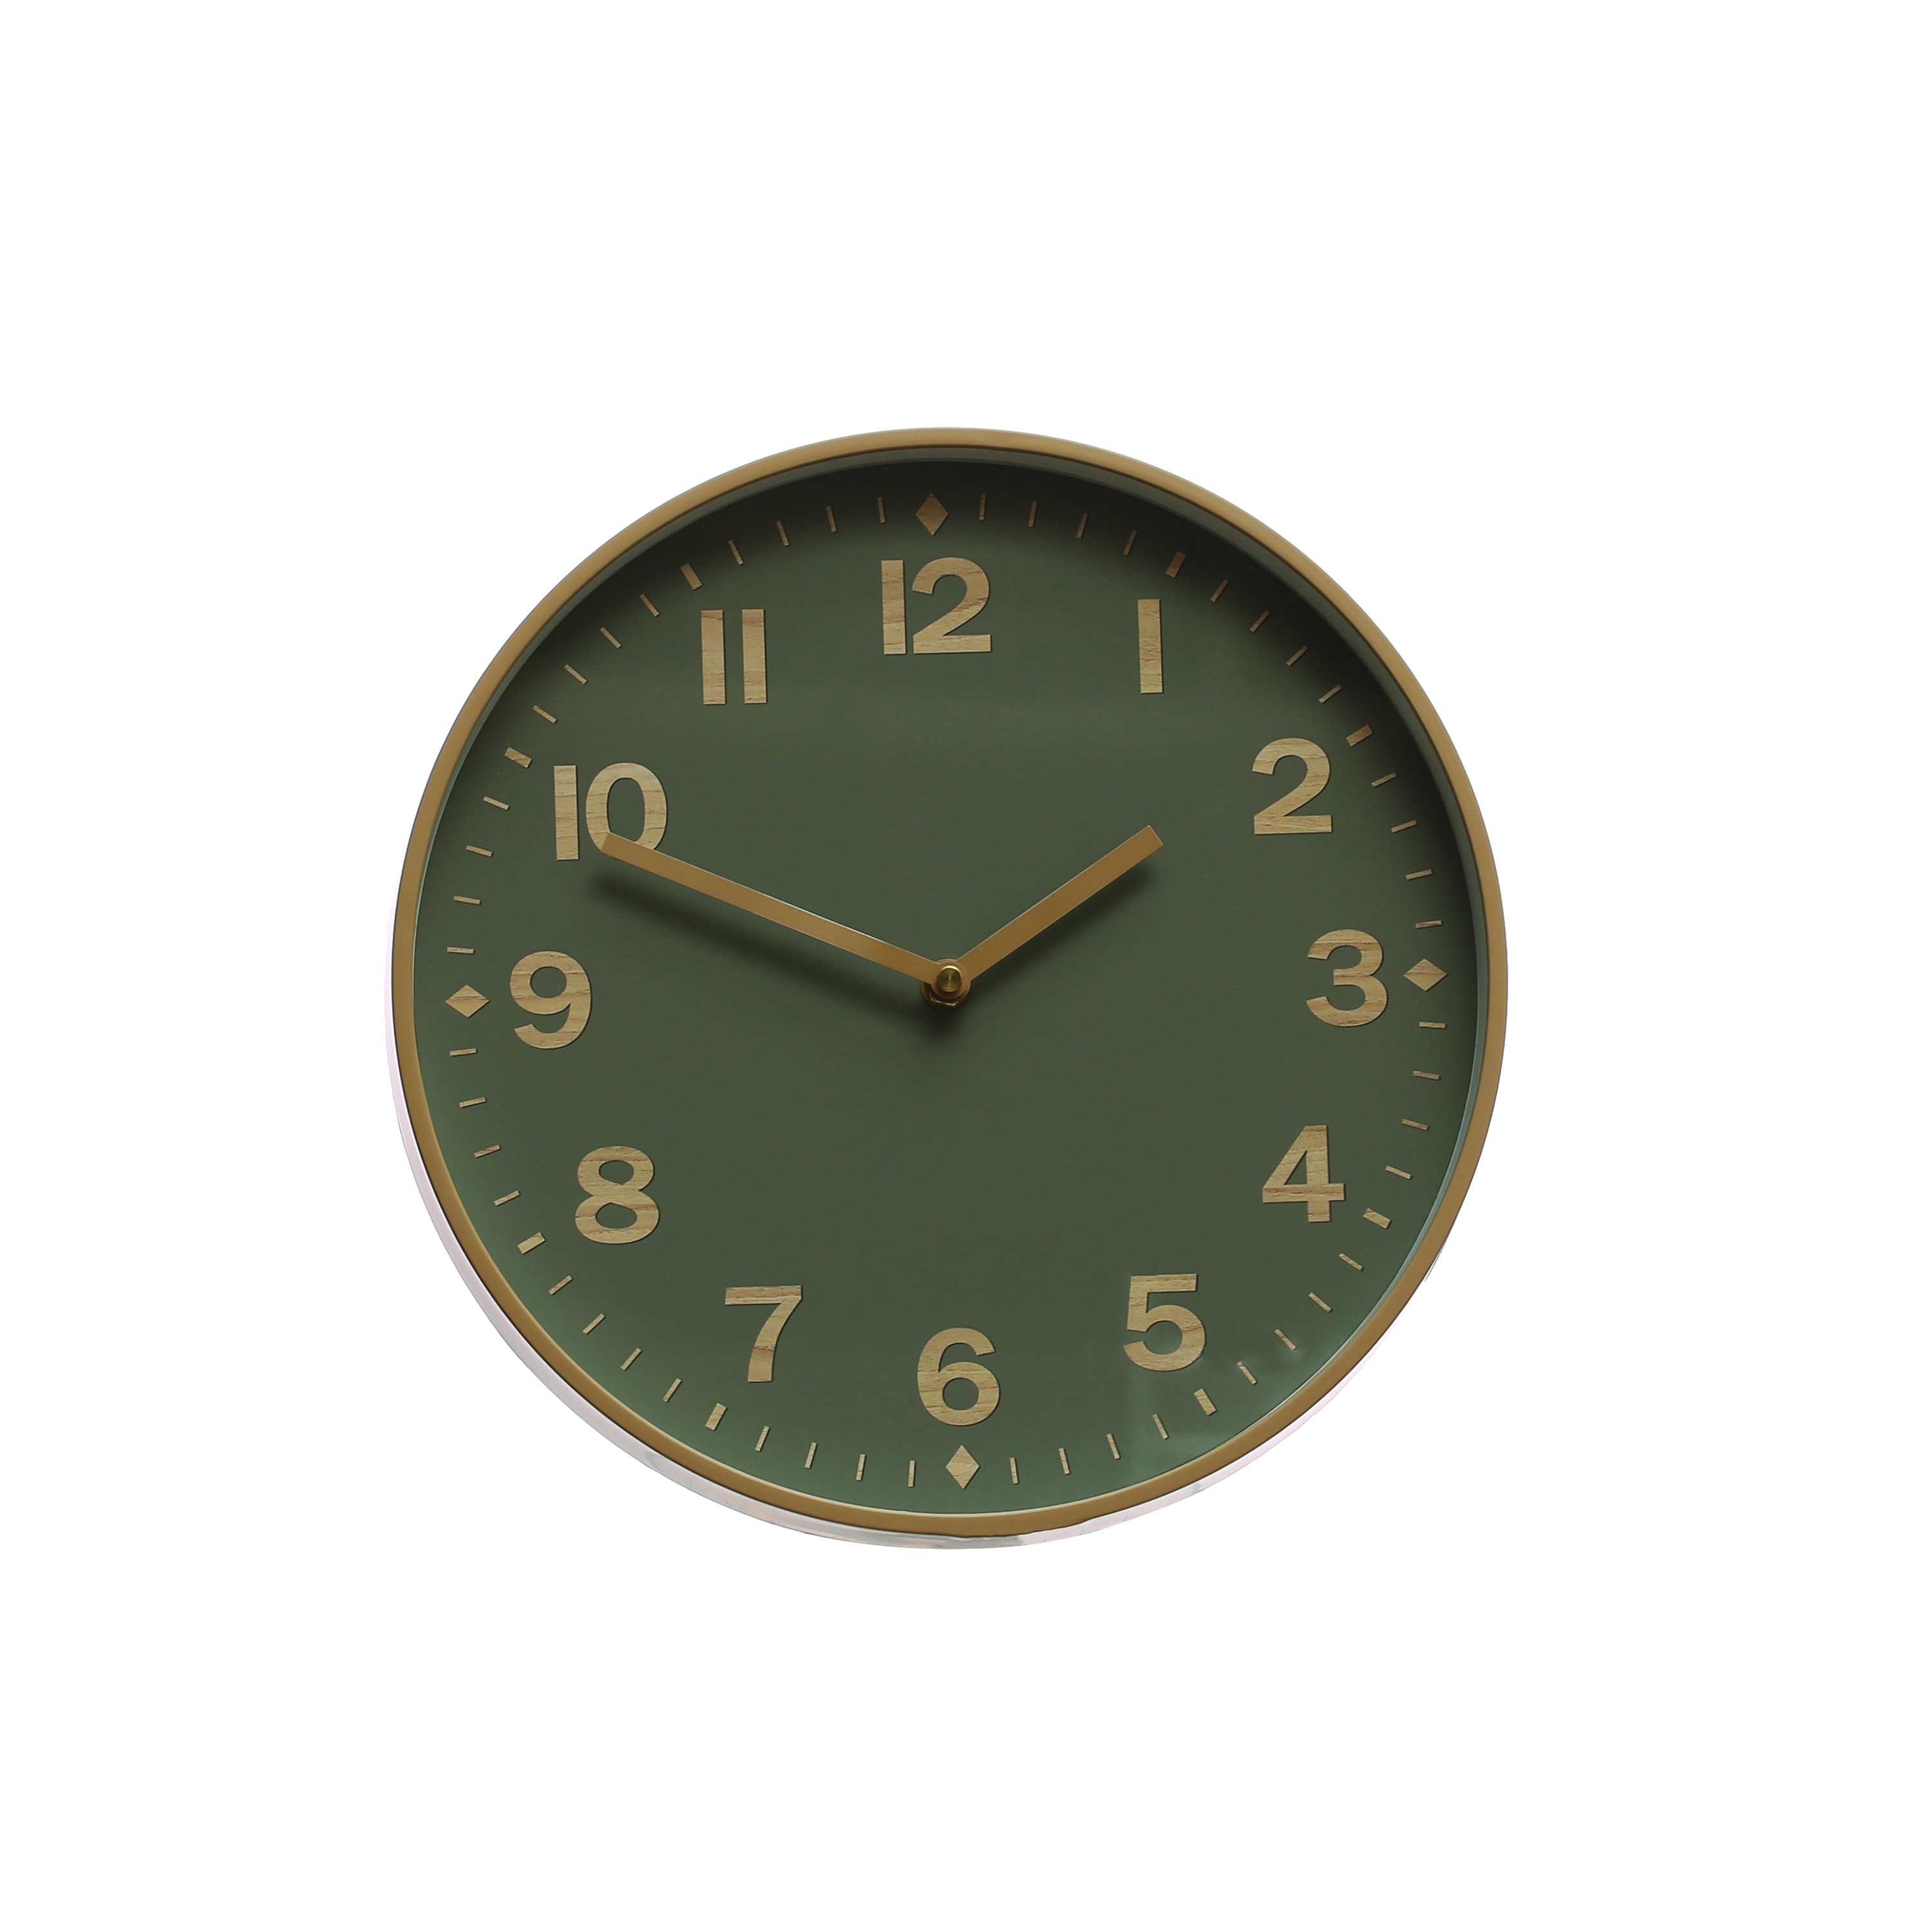 12 Inches Round Plastic Battery Operated Wall Clock for Home, Green, and Tan - Image 0